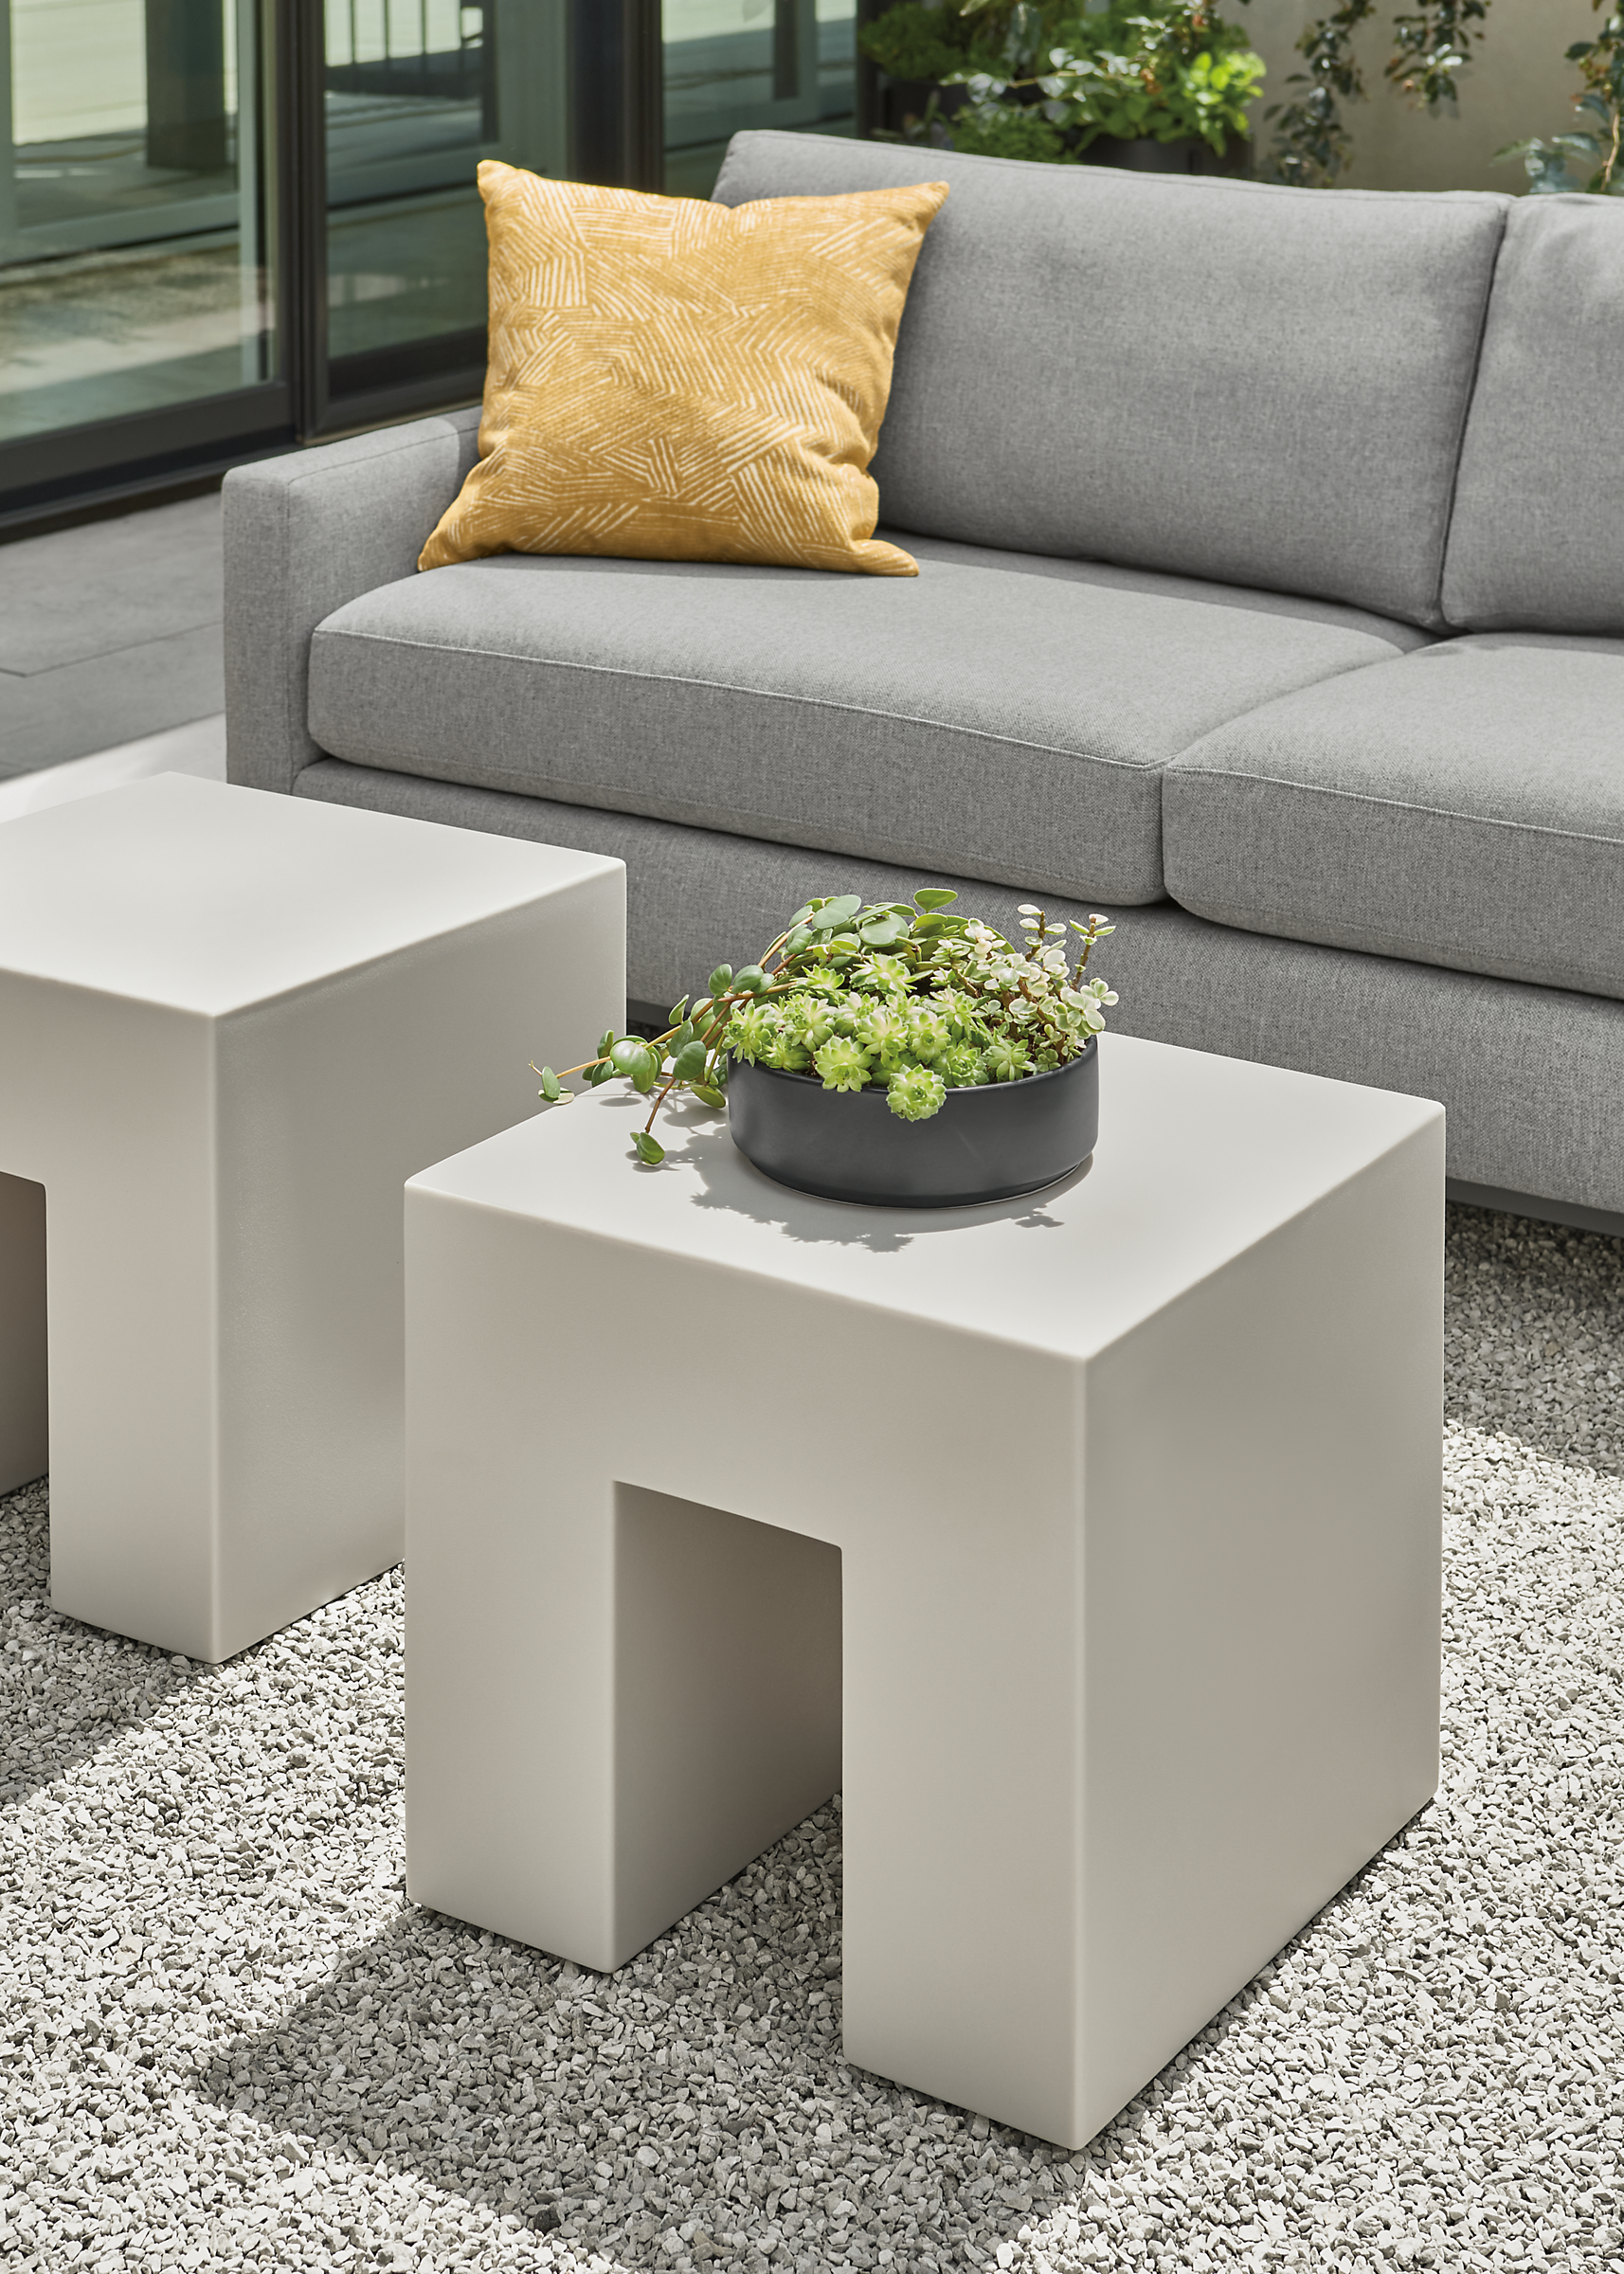 Two Vignelli 18-square outdoor cubes in light grey with Tomas outdoor sofa in Mist fabric.